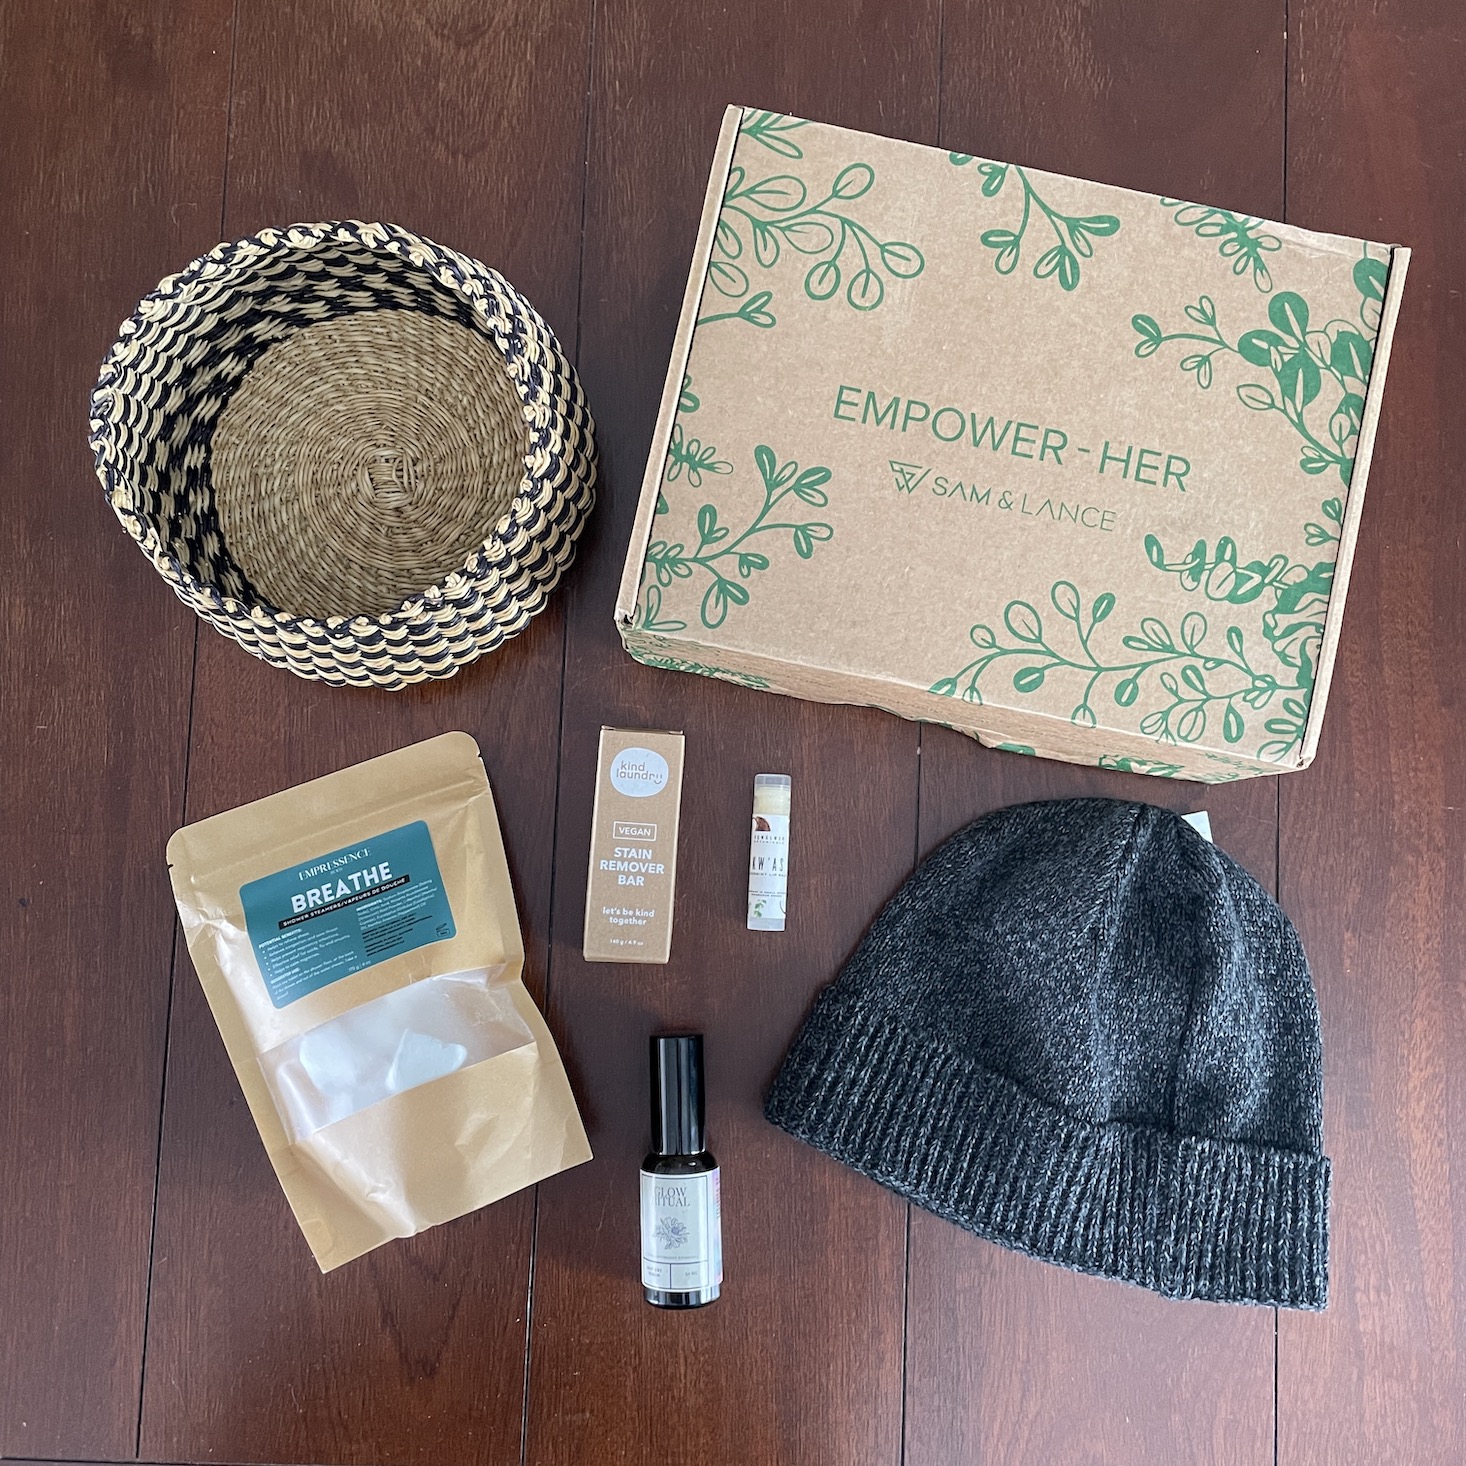 Sam and Lance Empower Her Box Winter 2022 - all items